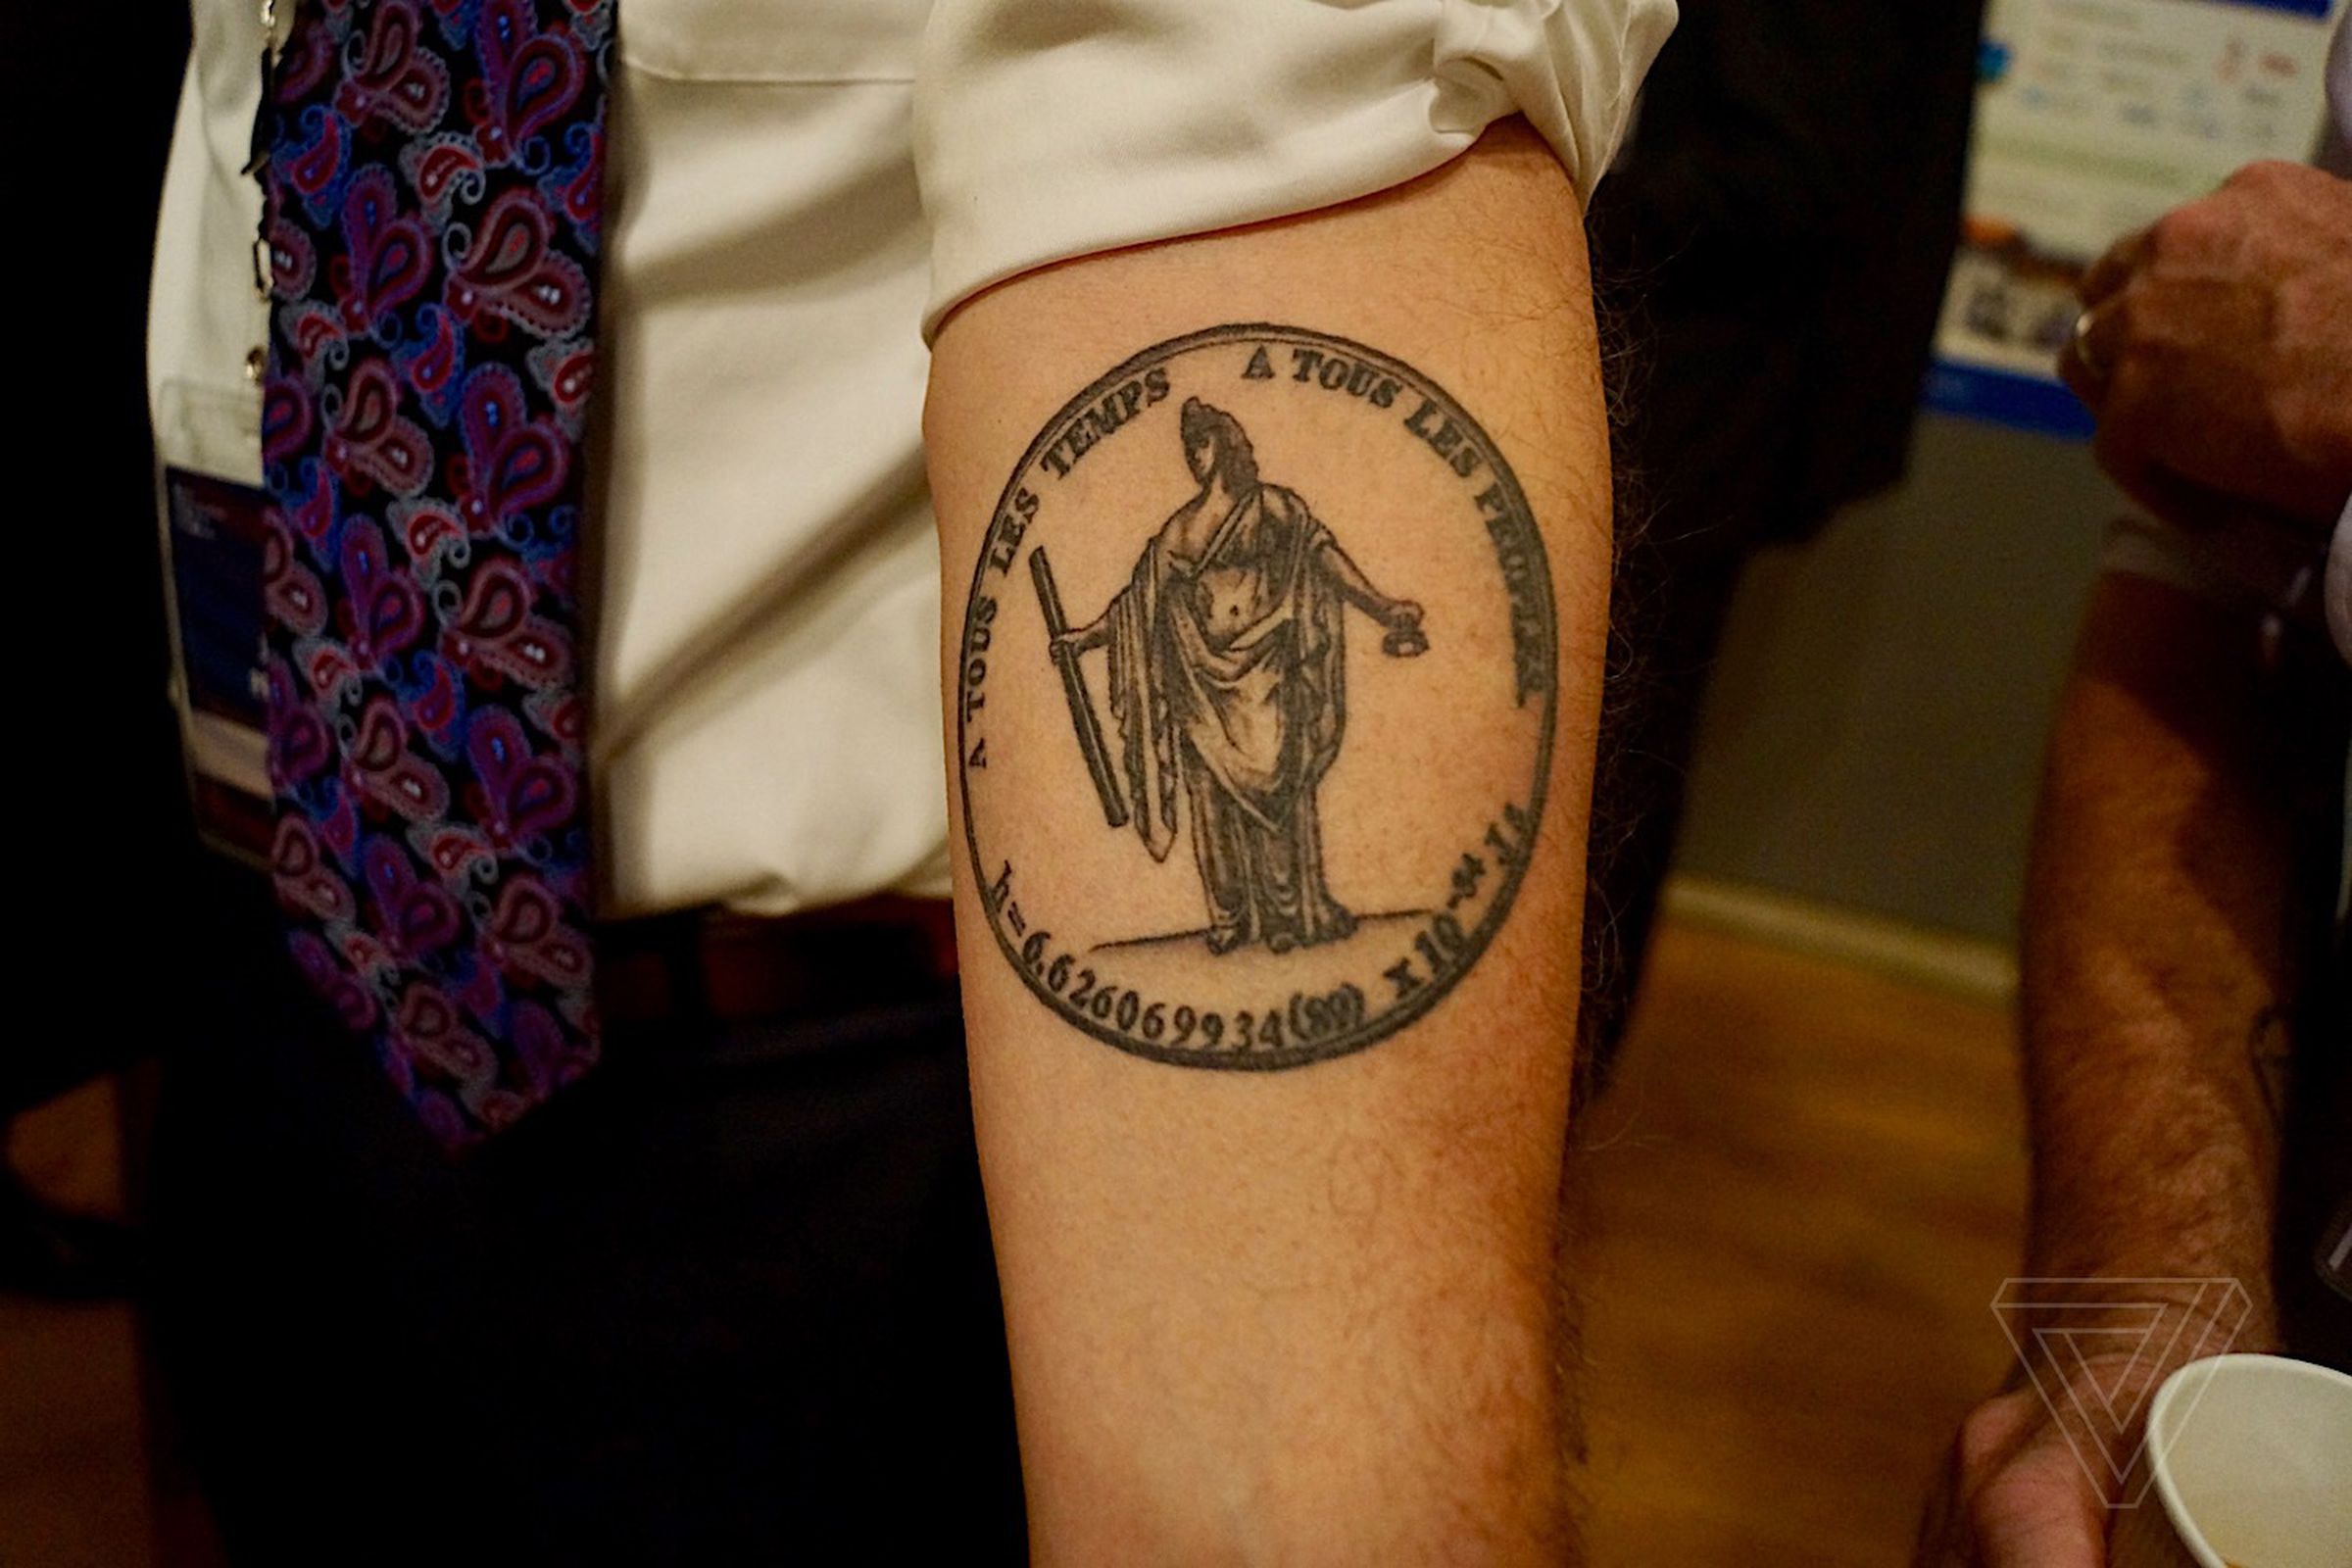 Jon Pratt, a physicist from NIST, shows off his metrology-themed tattoo. It shows the original seal of the BIPM (with a statue holding a prototype meter and kilogram), with Planck’s constant written underneath. 